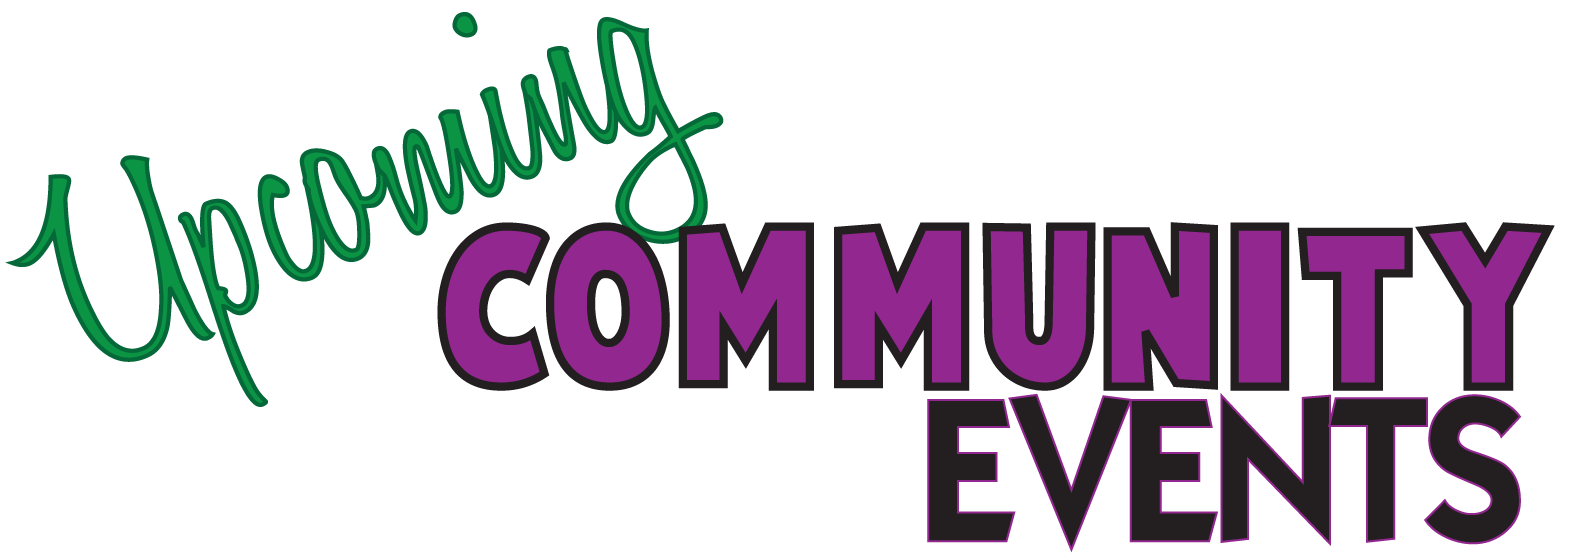 Upcoming Community Events Clipart